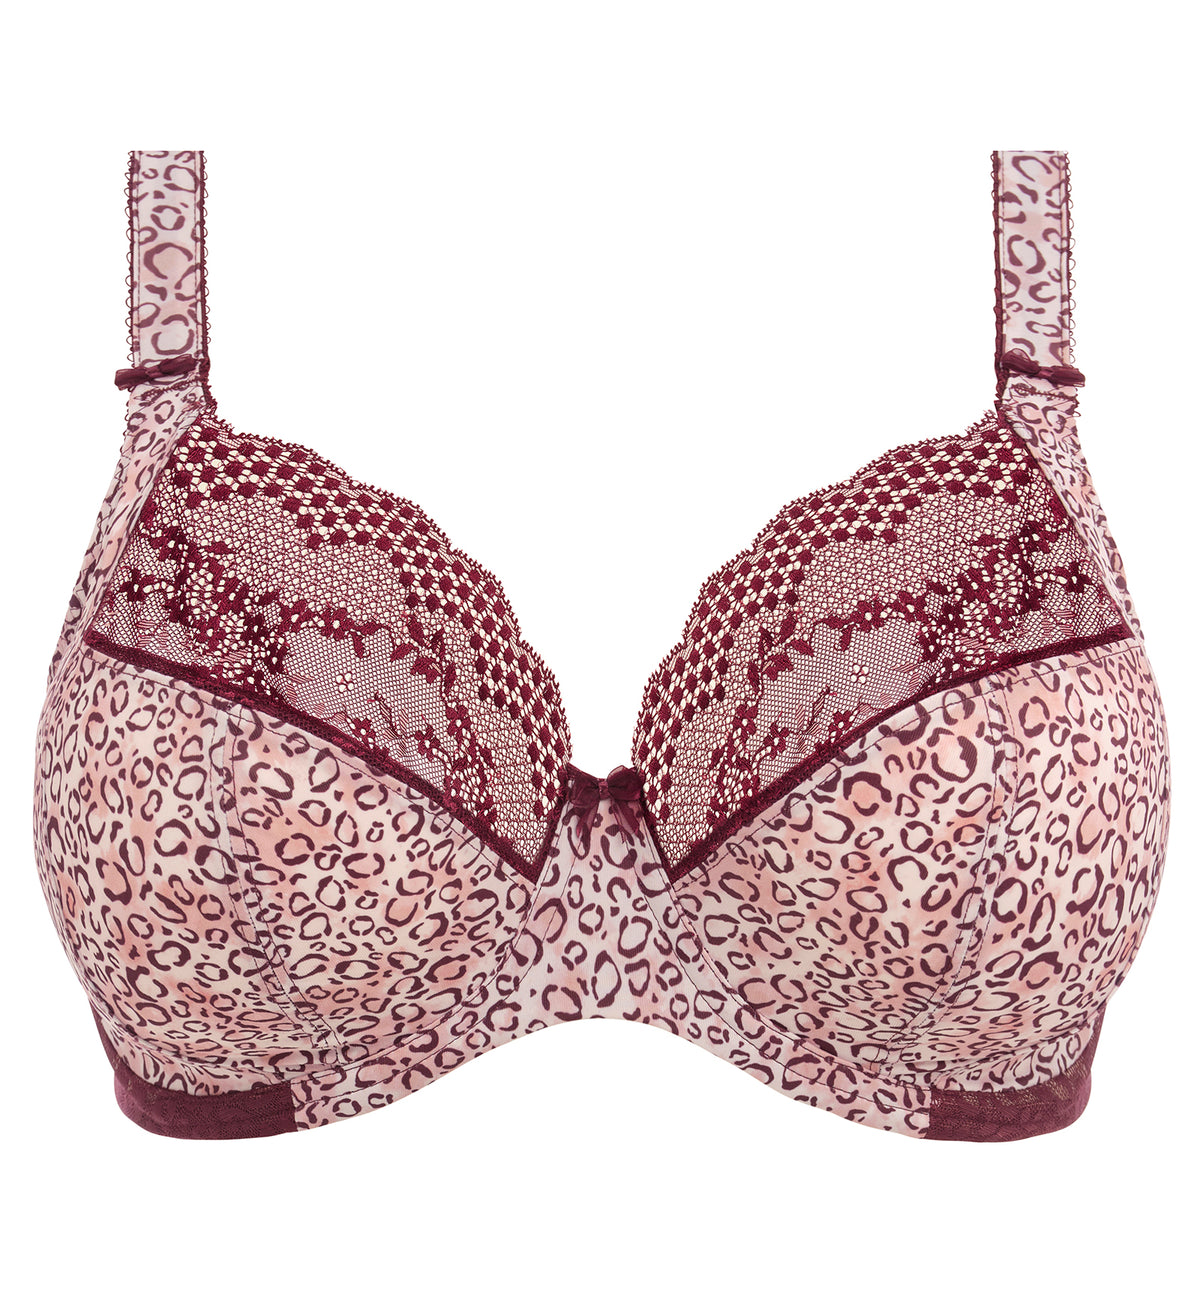 Elomi Lucie Banded Stretch Lace Plunge Underwire Bra (4490),32HH,Wild Thing - Wild Thing,32HH